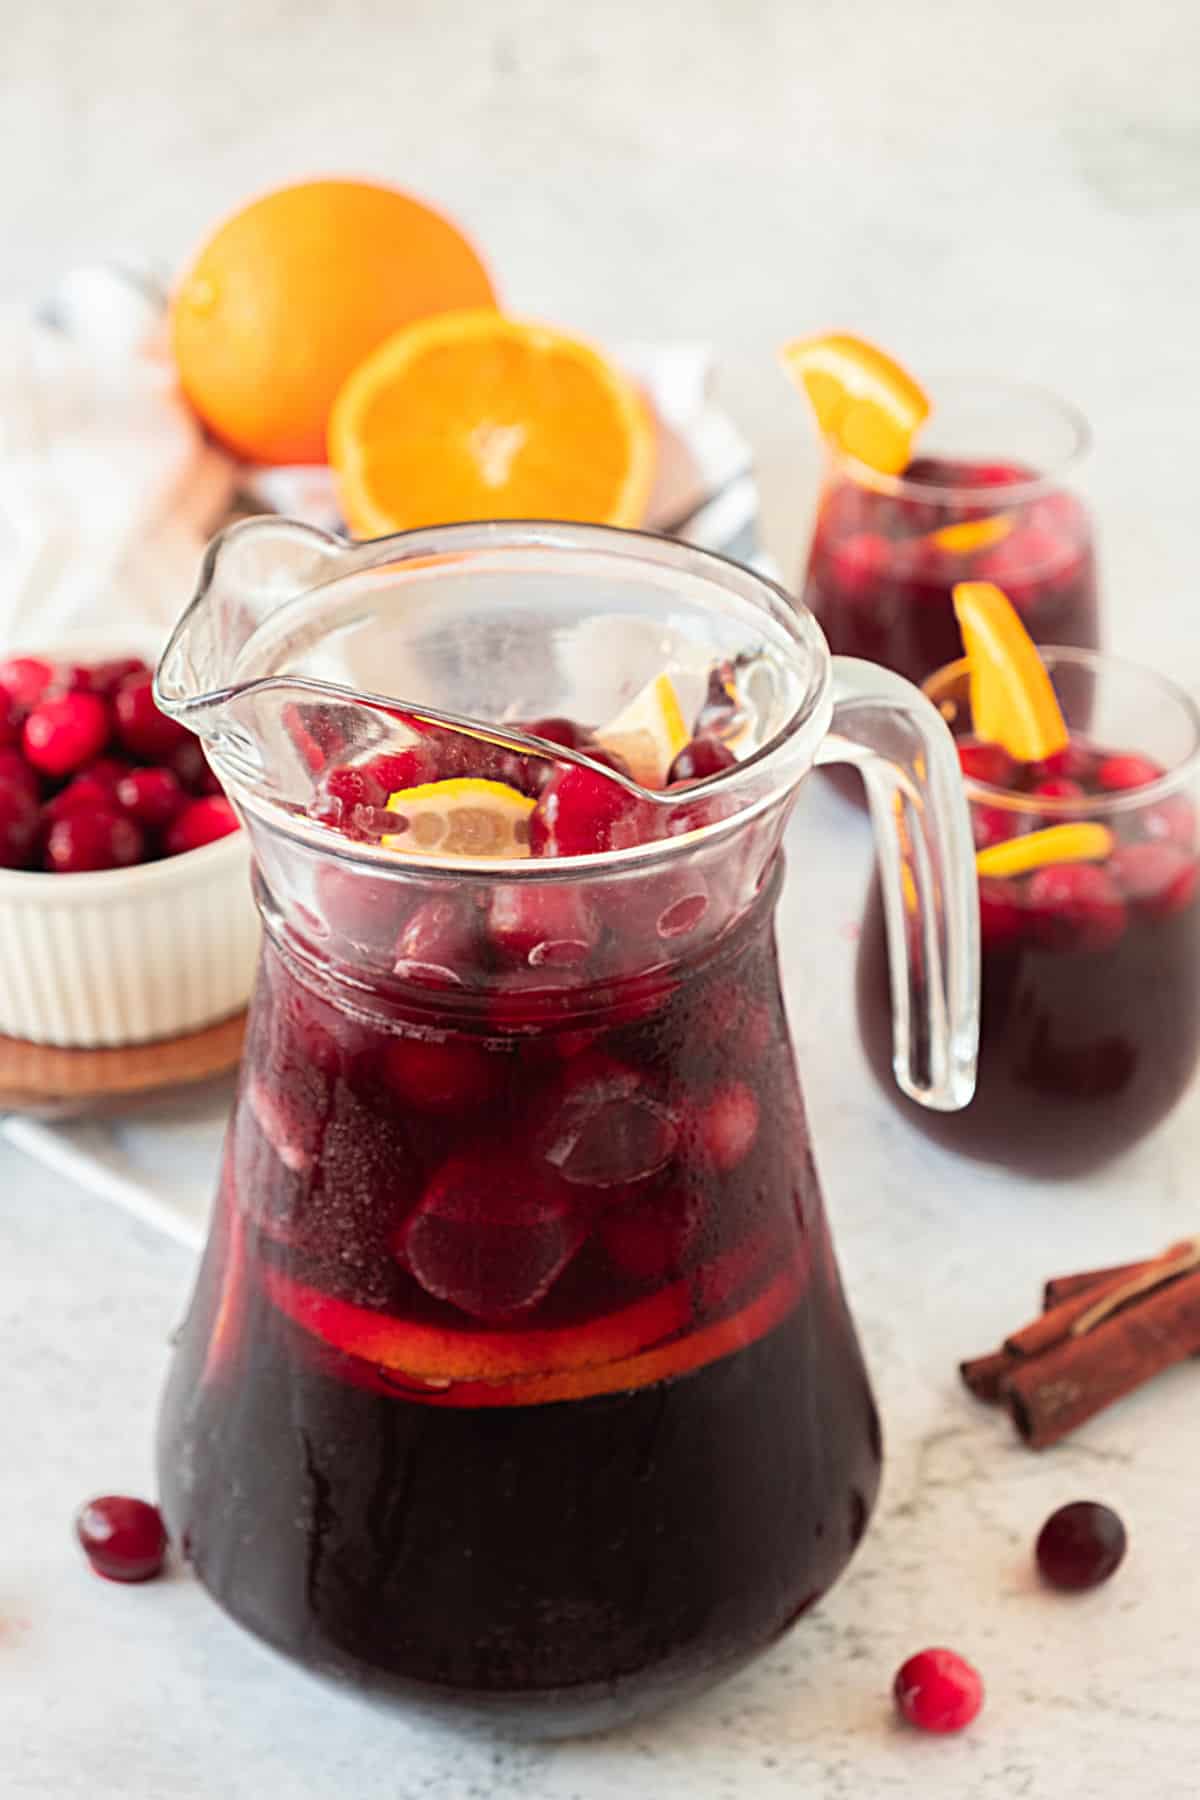 Filled pitcher with cranberry sangria with orange. Light colored surface and background. Orange slices, fresh cranberries.